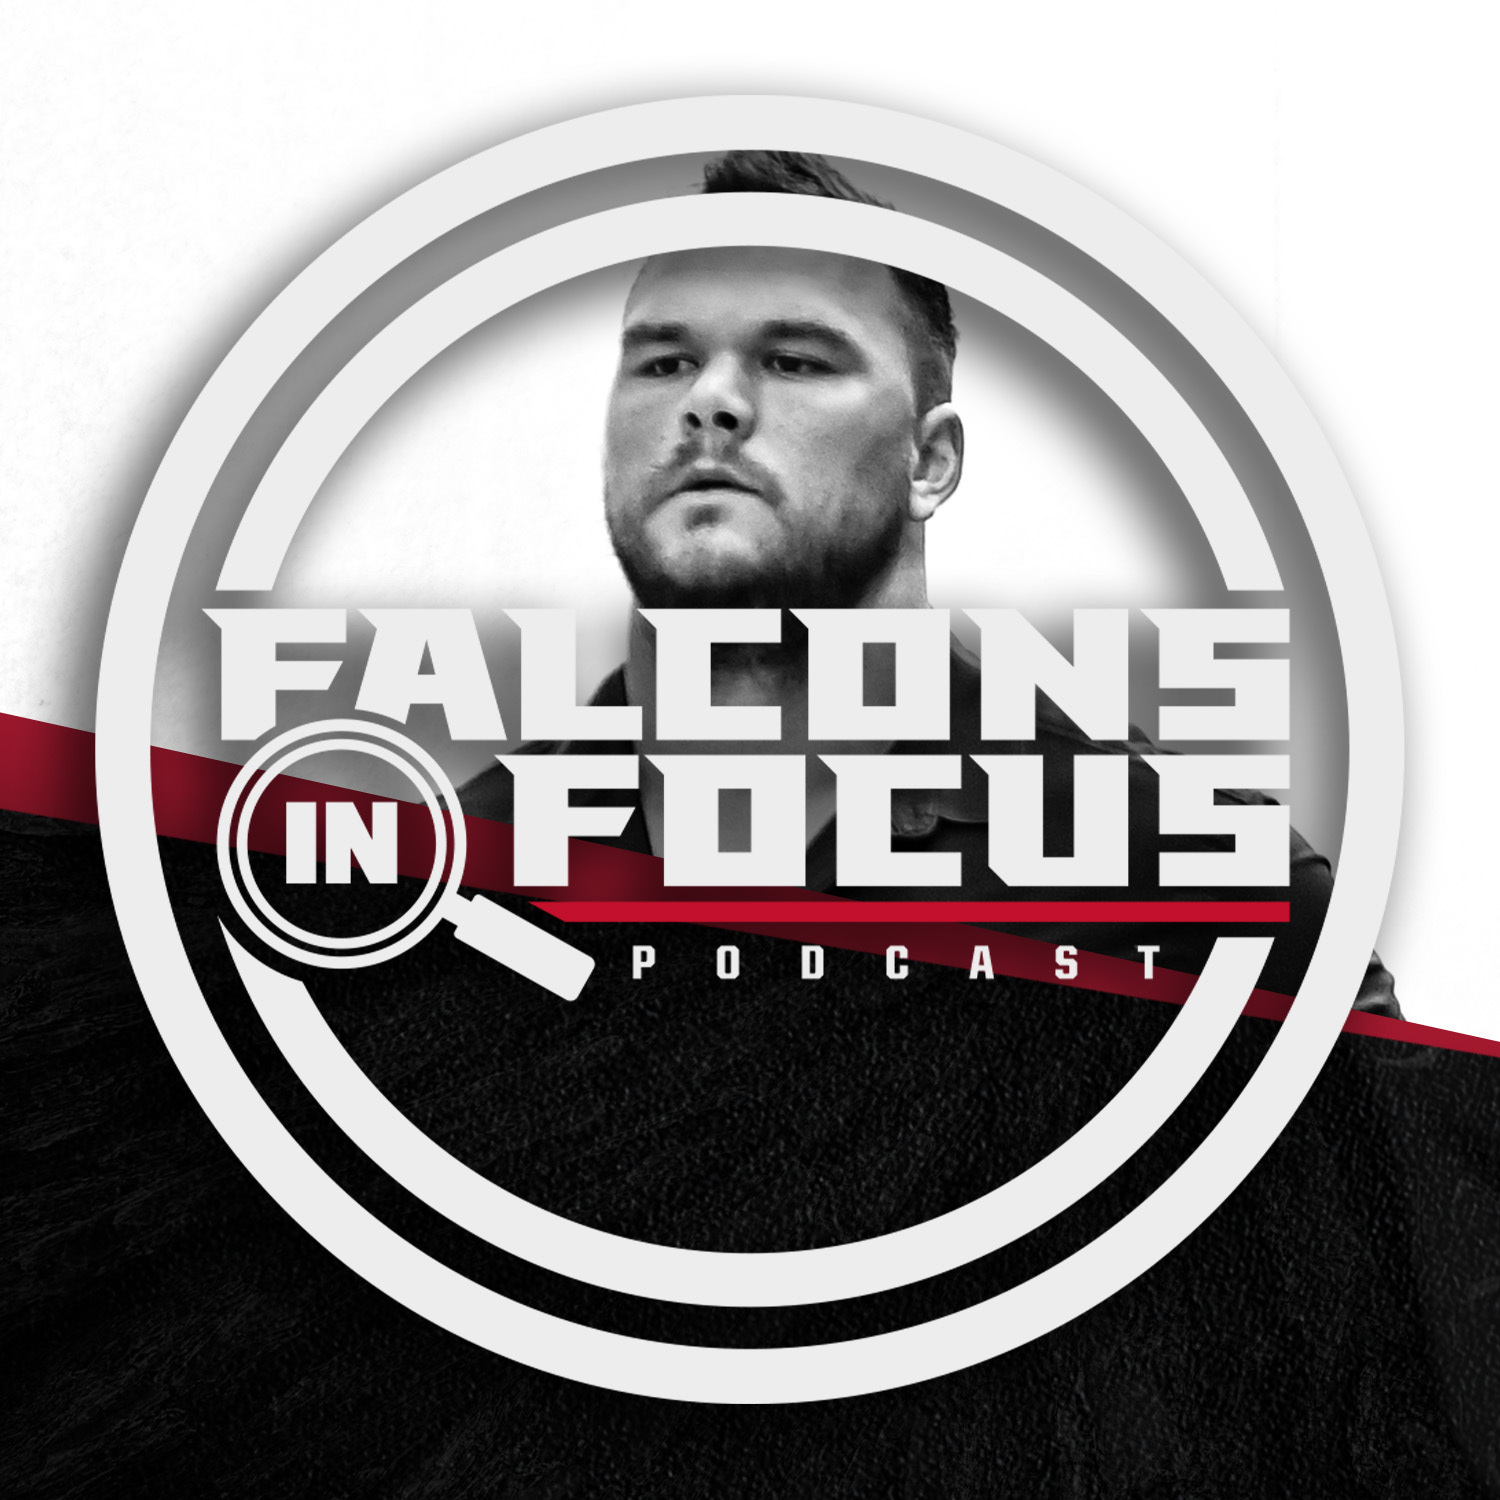 Jake Matthews discusses the birth of his son on a game day, coming from football royalty | Falcons in Focus